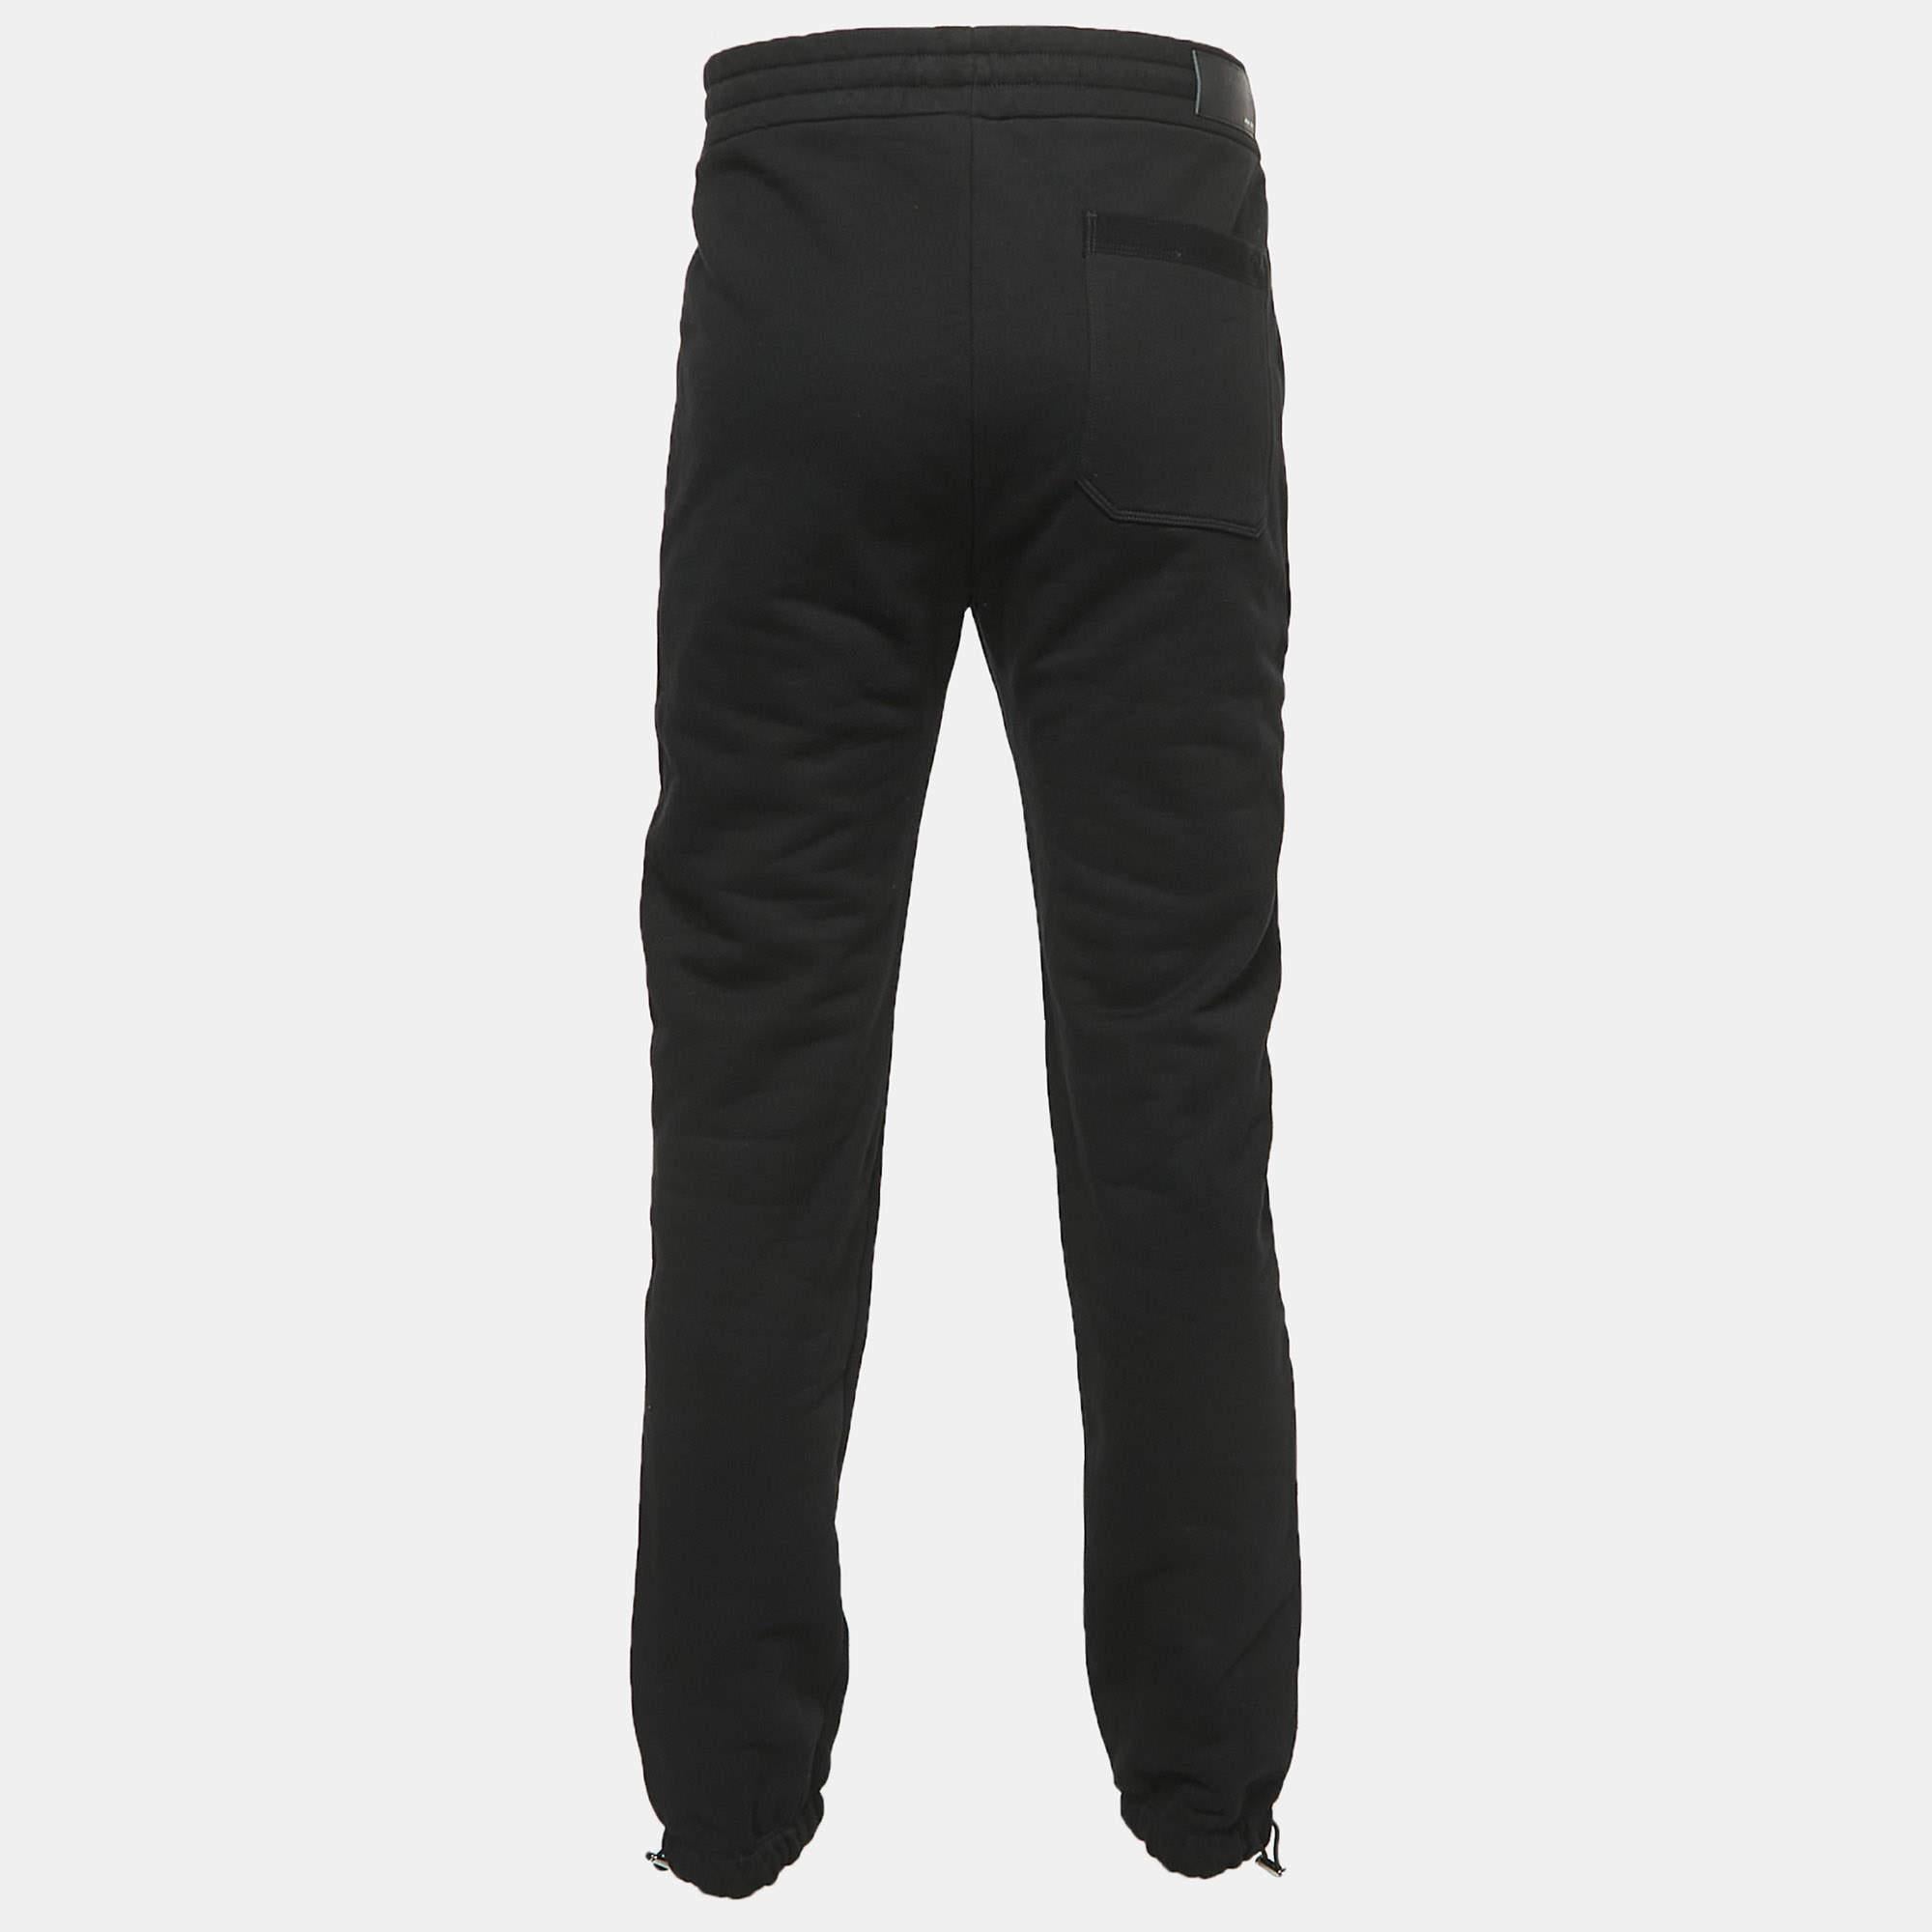 Step out for a jog with these super-stylish joggers, lounge around, or go out to run errands, the creation will make you feel comfortable all day. It has been made using high-grade materials and will go well with sneakers, t-shirts, or sweatshirts